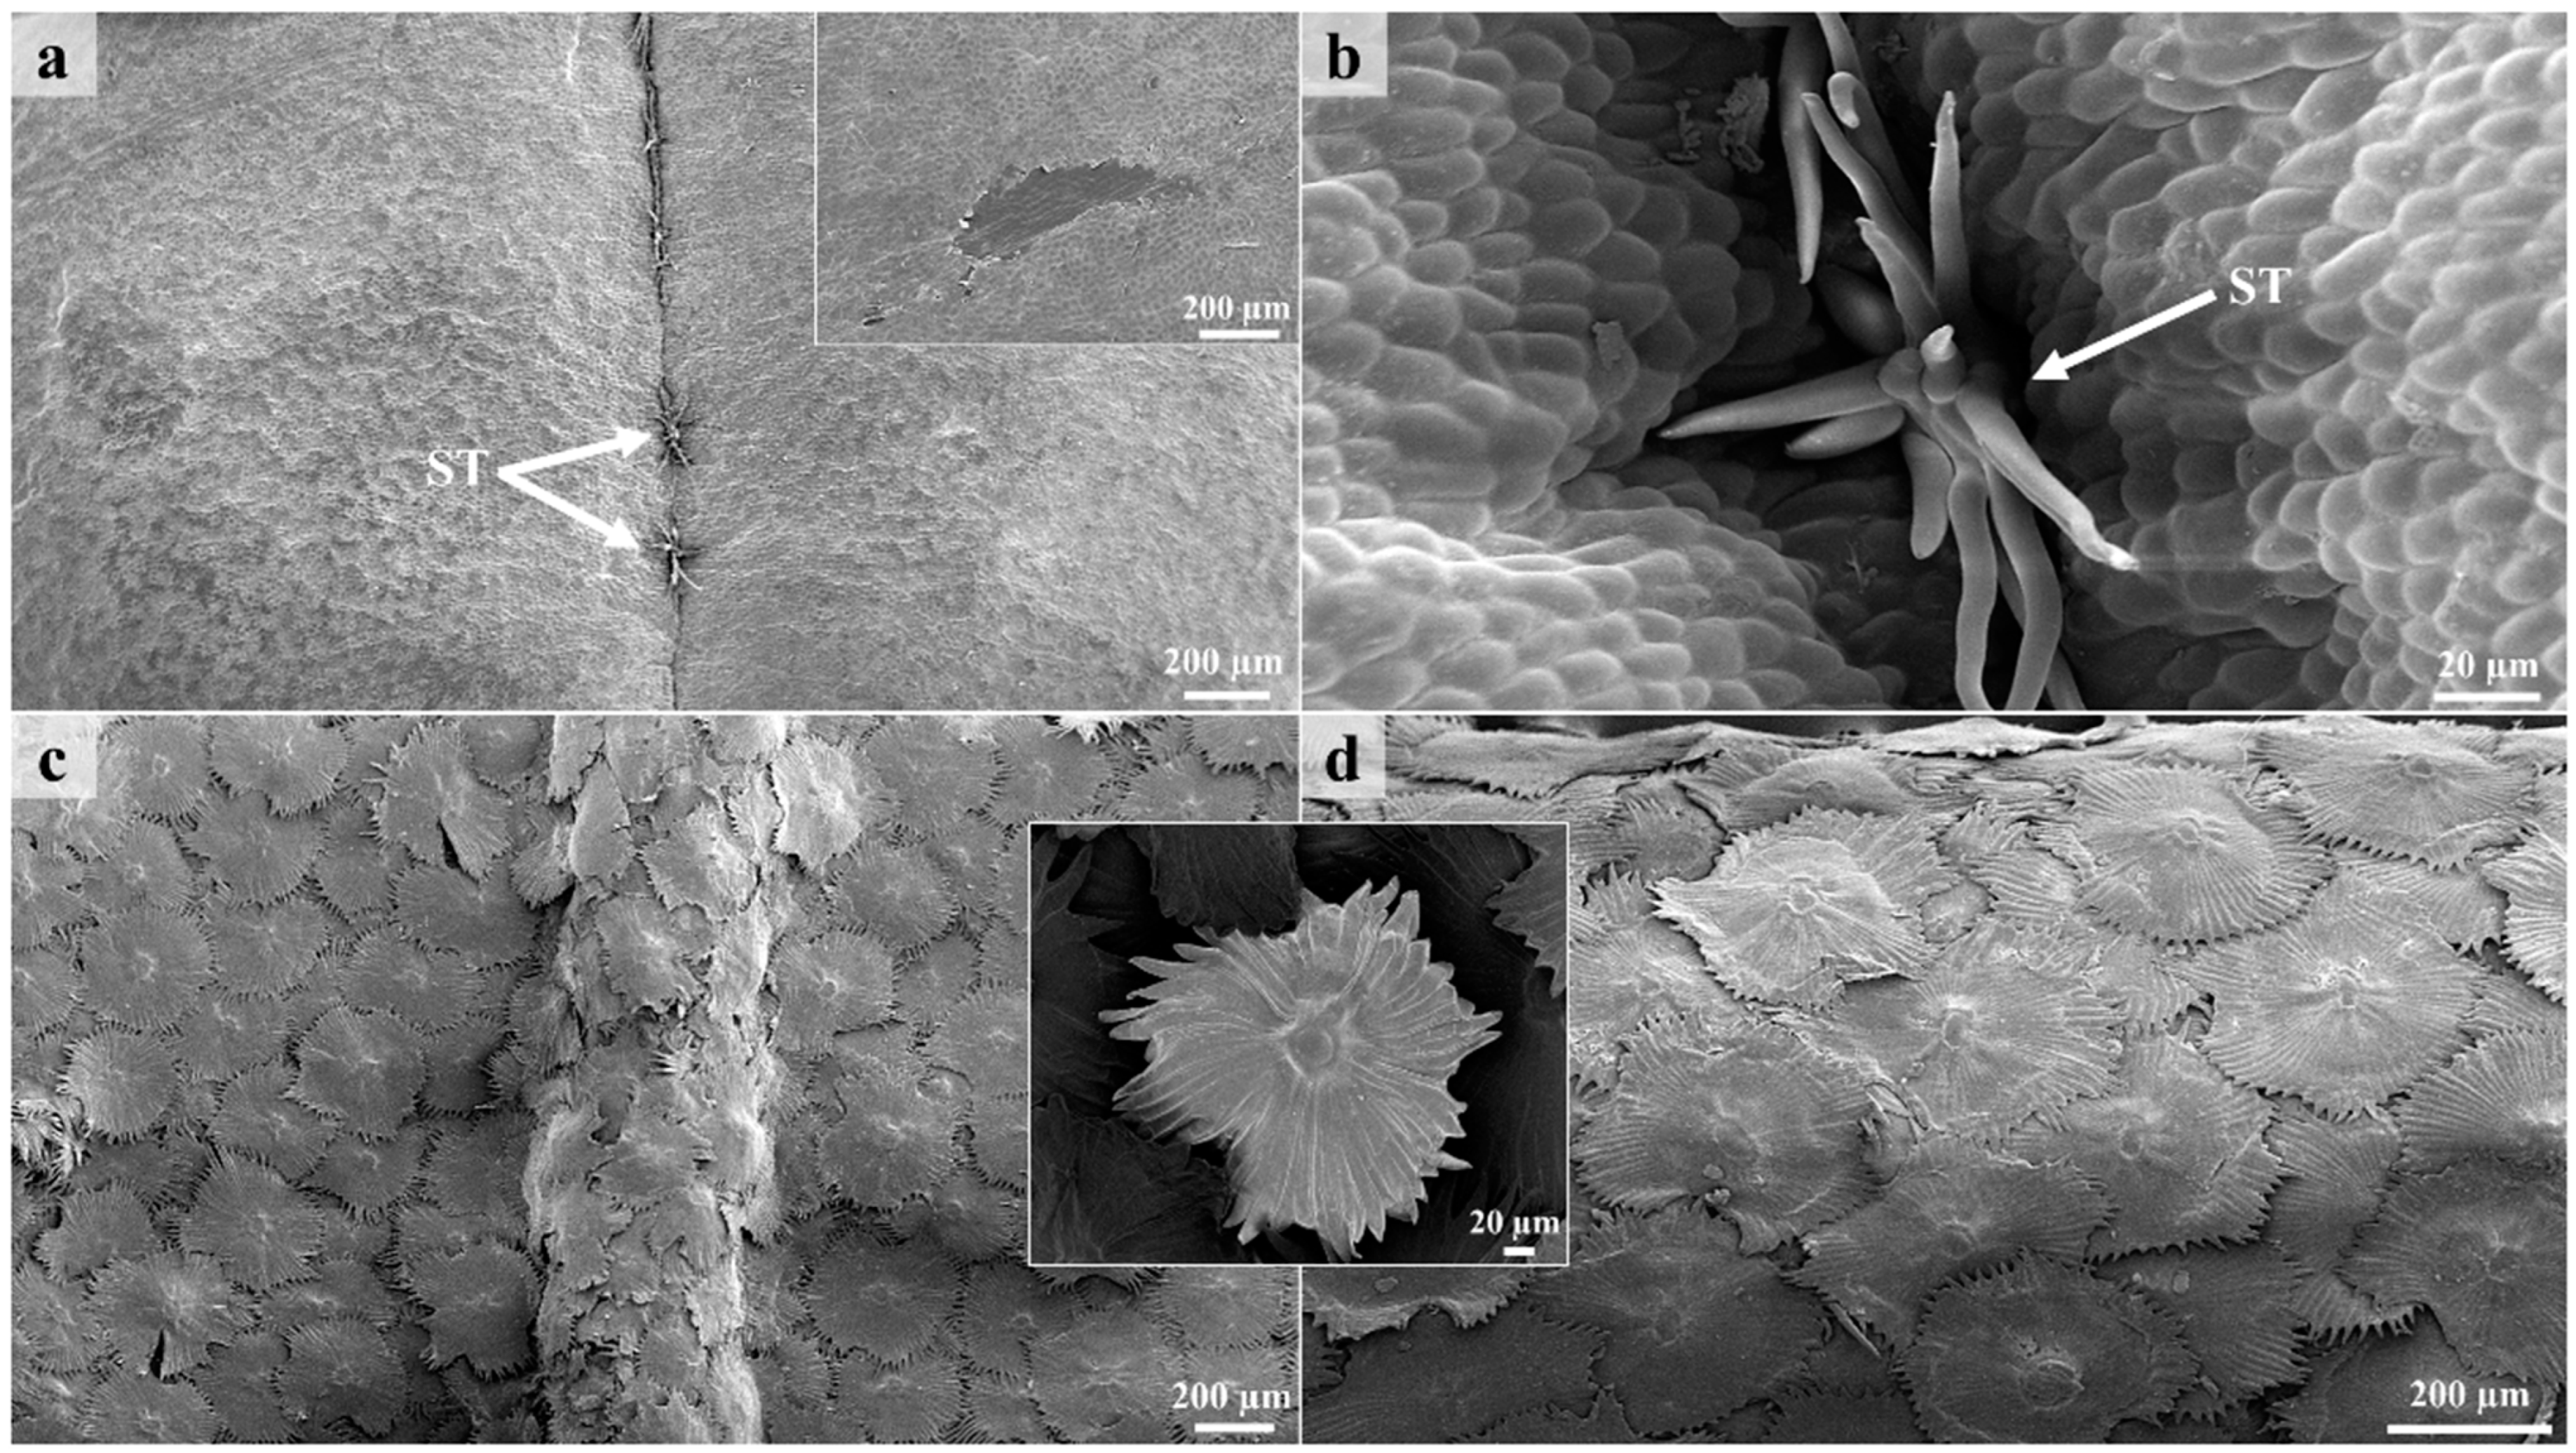 Scanning electron microscope micrographs of trichomes of tribe